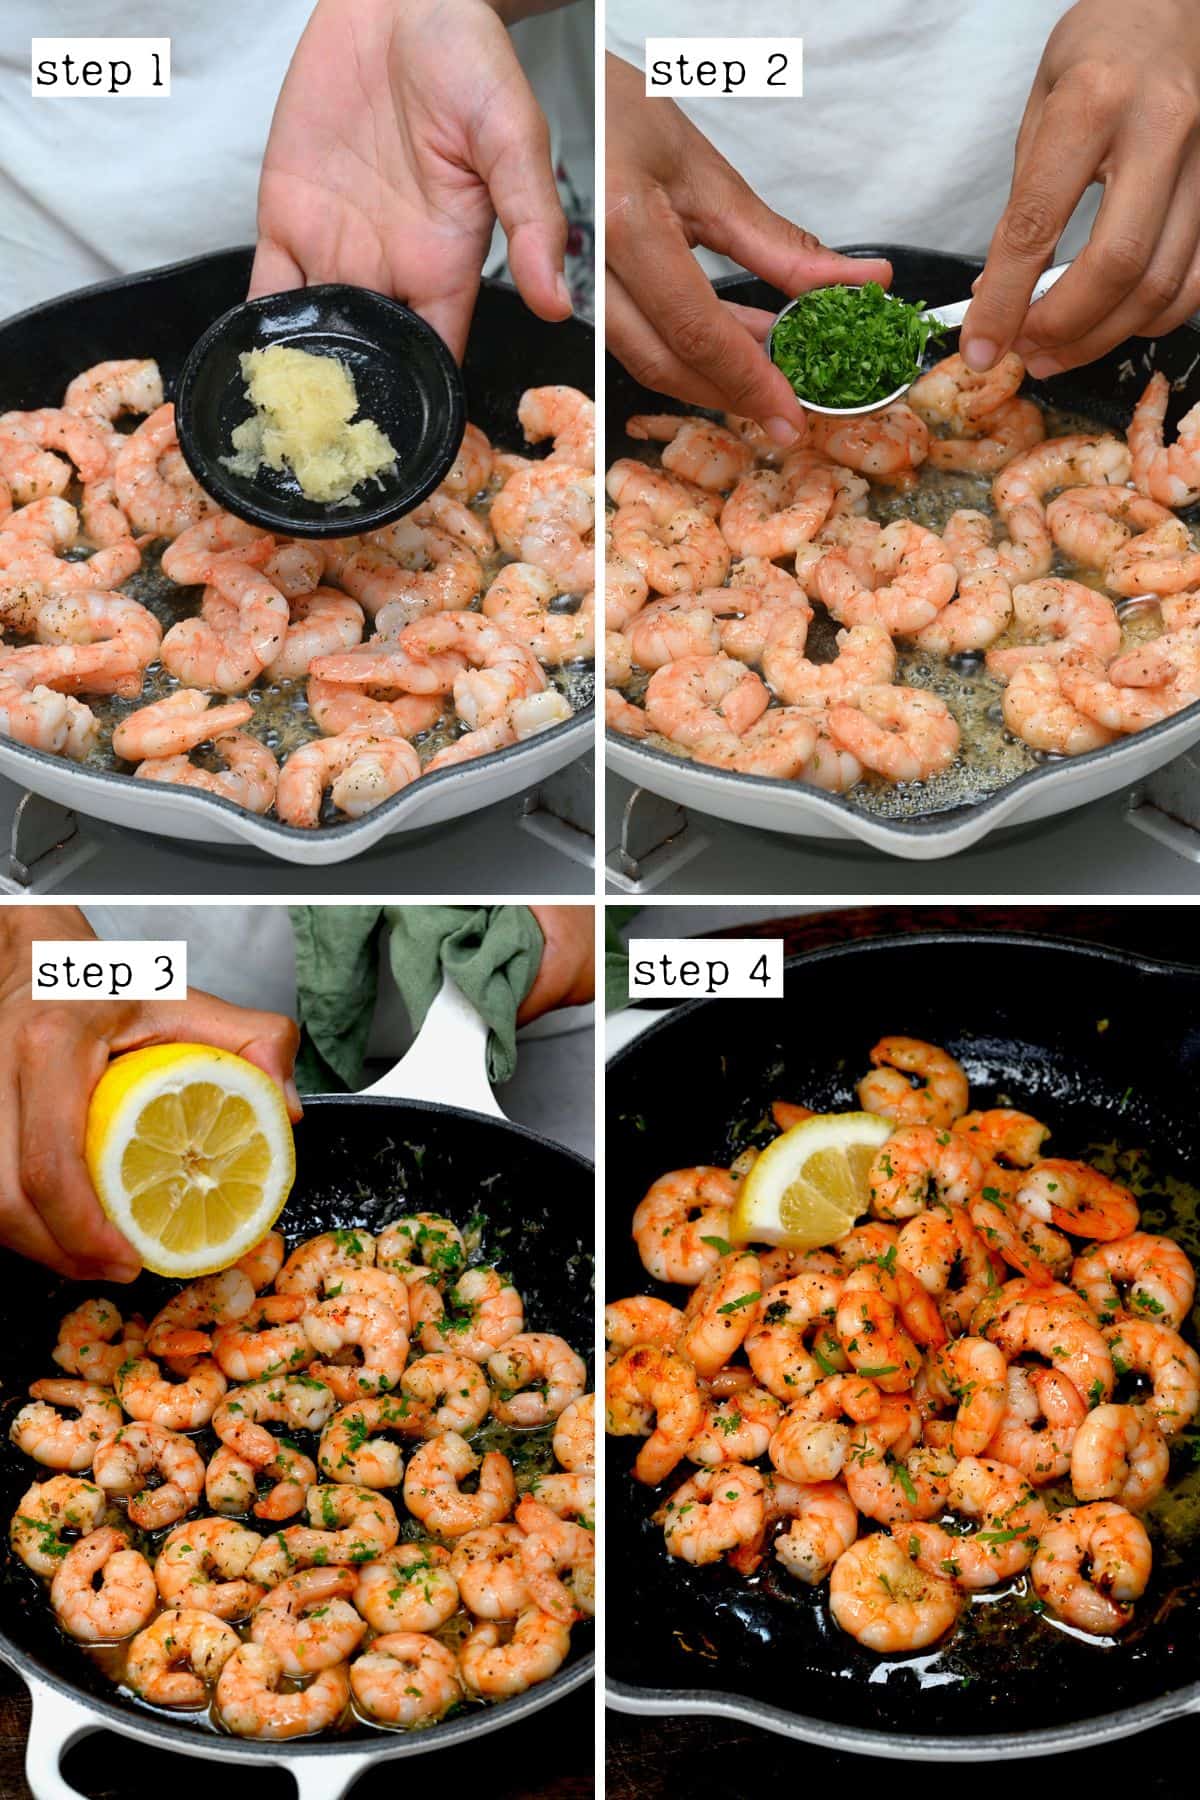 Adding garlic and parsley to cooked shrimp